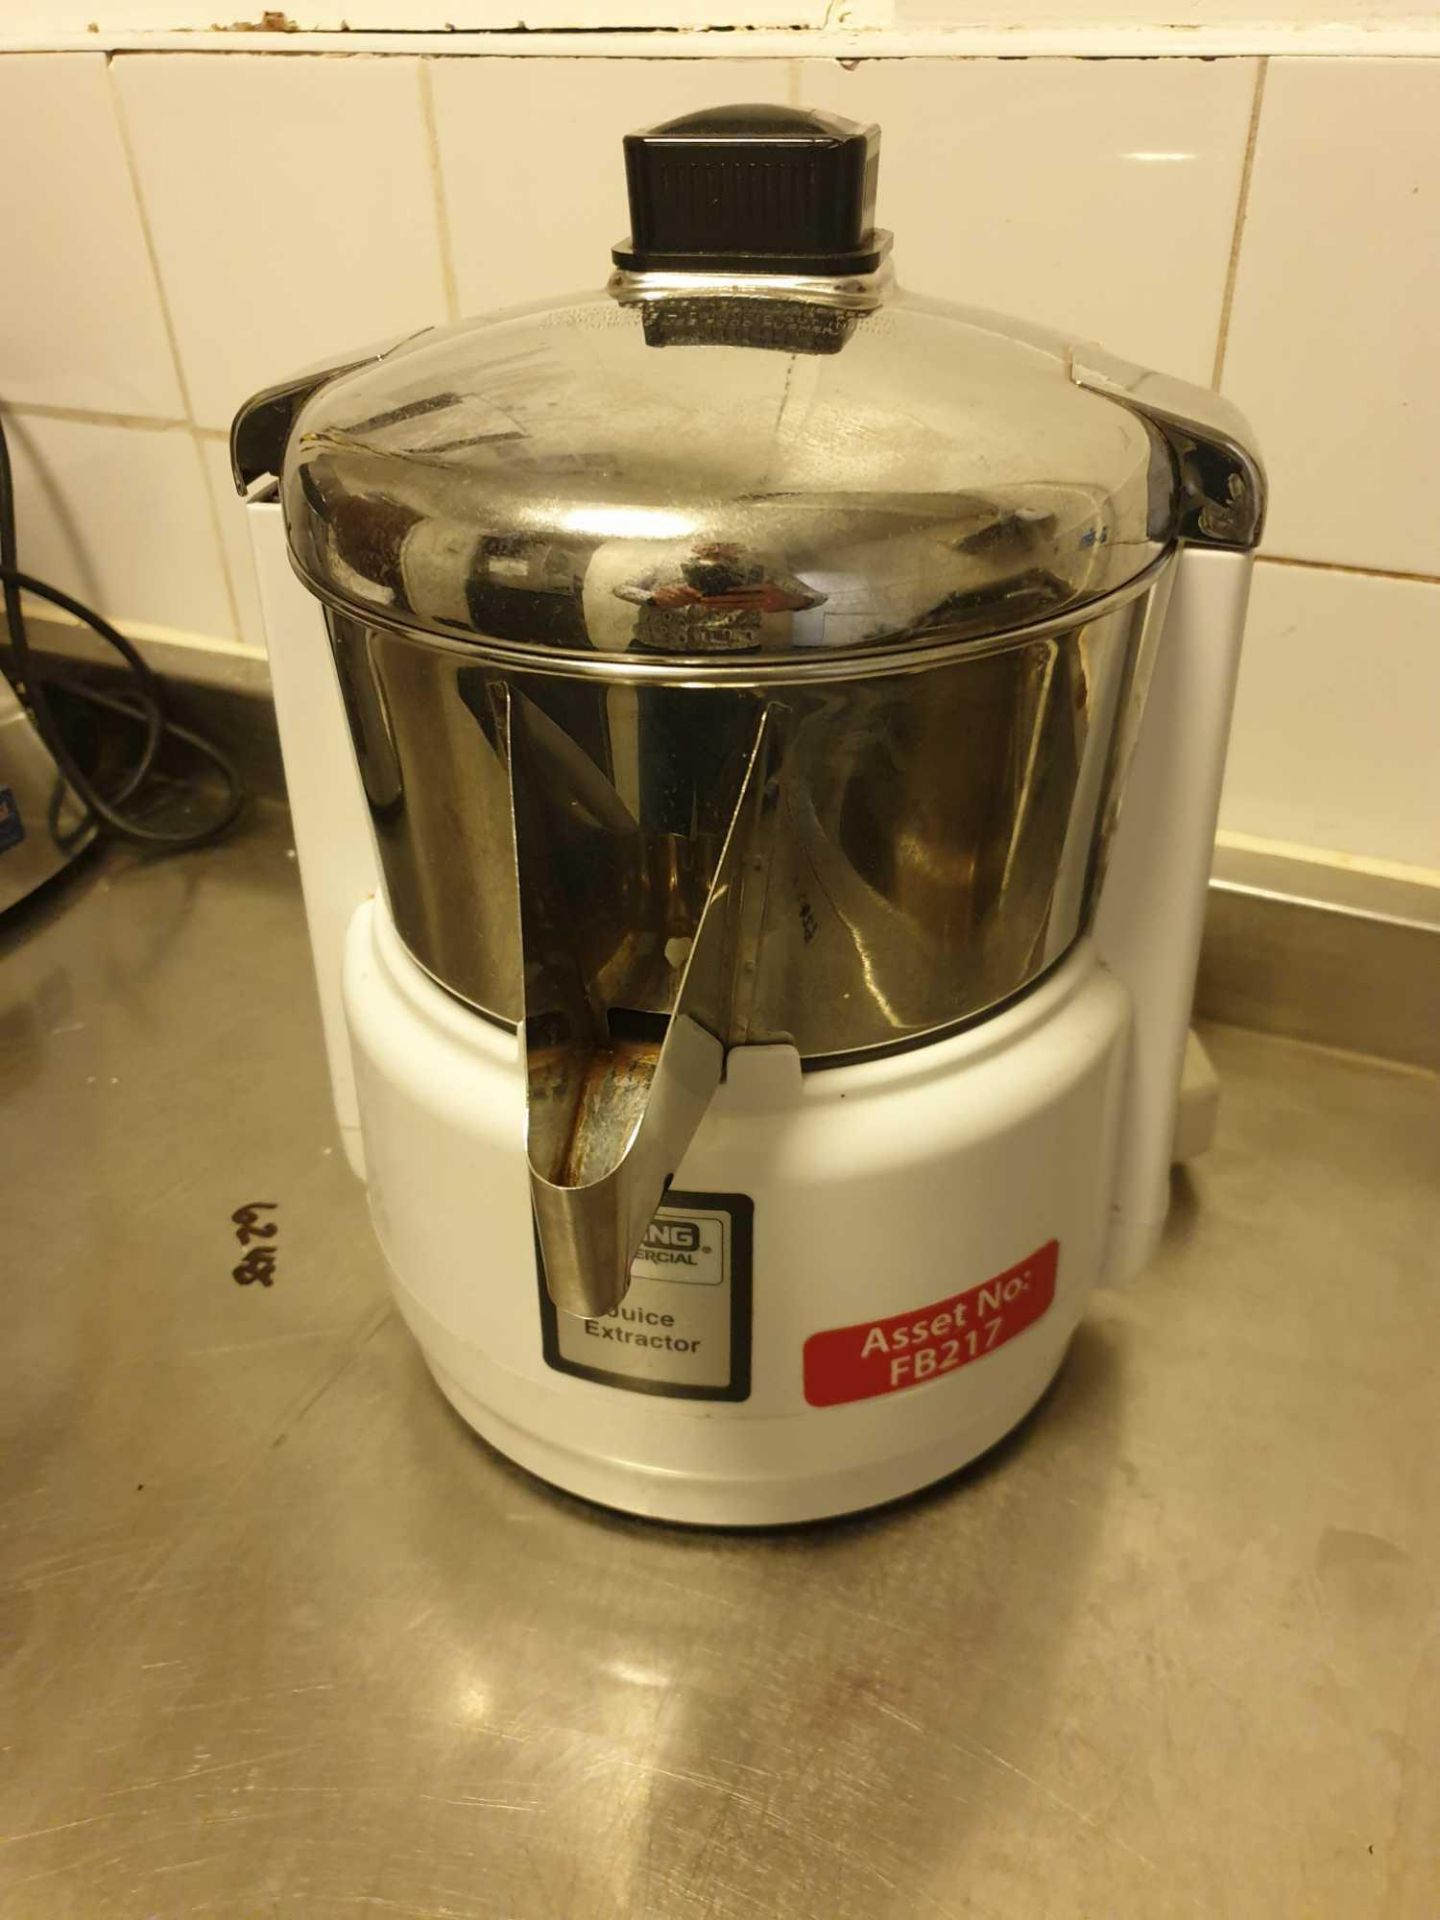 Waring 6001X Juice Extractor Quickly And Easily Extracts Pulp-Free Juice From Vegetables, Fruits And